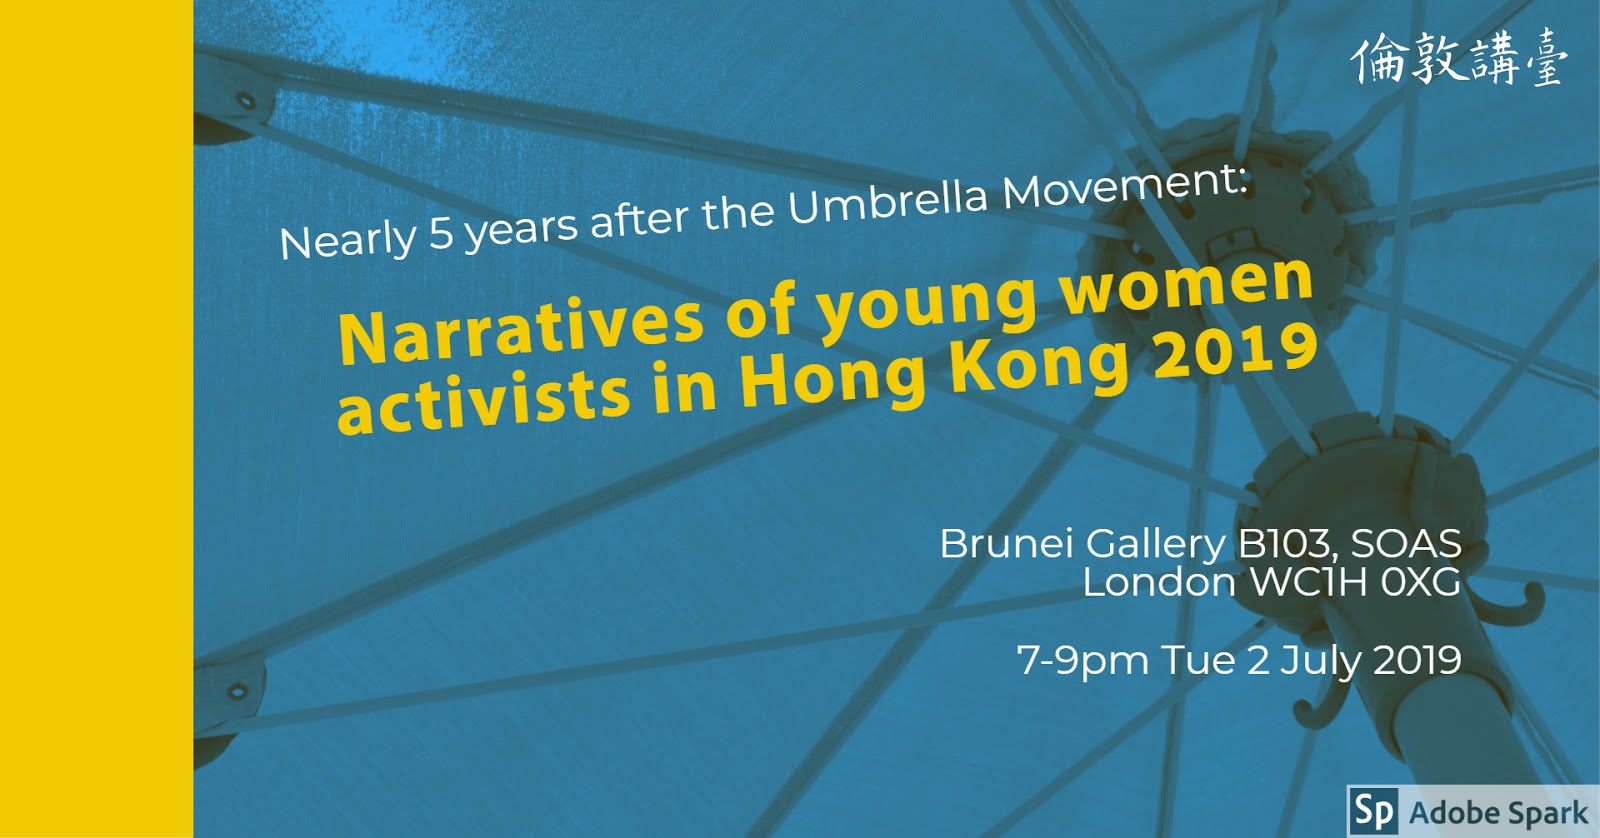 image from Narratives of young women activists in Hong Kong 2019